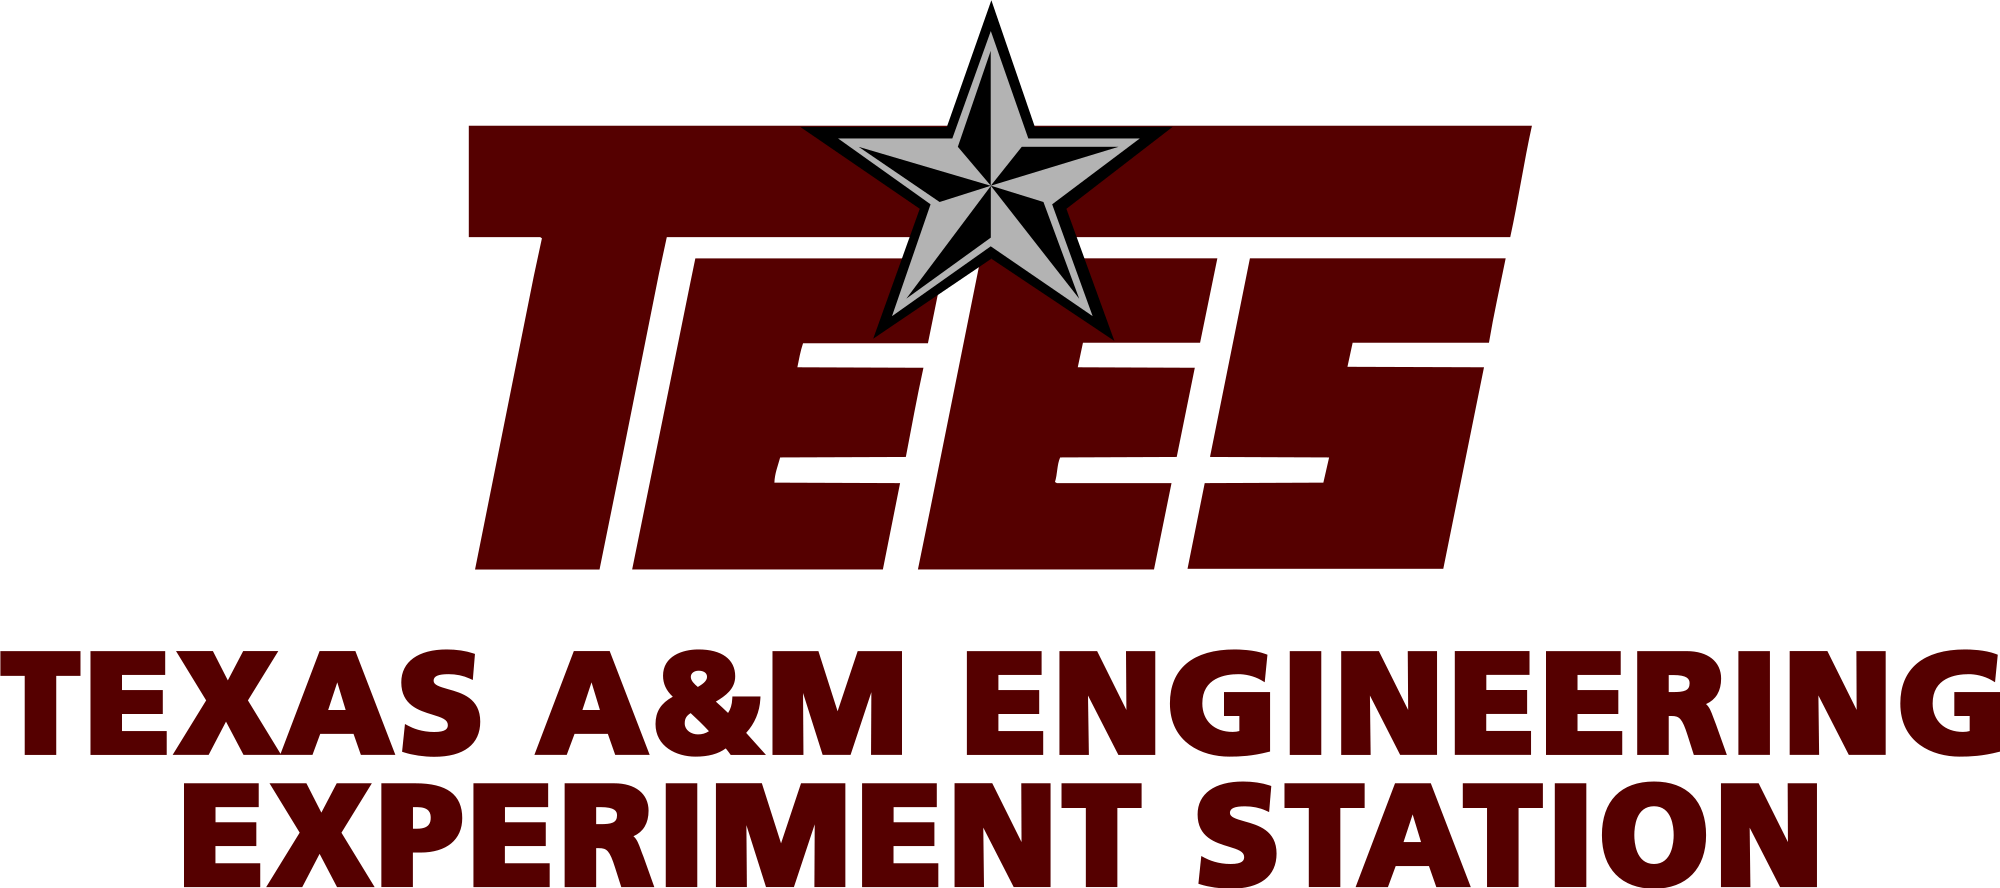 Texas Station Logo - Texas A&M Engineering Experiment Station logo.svg